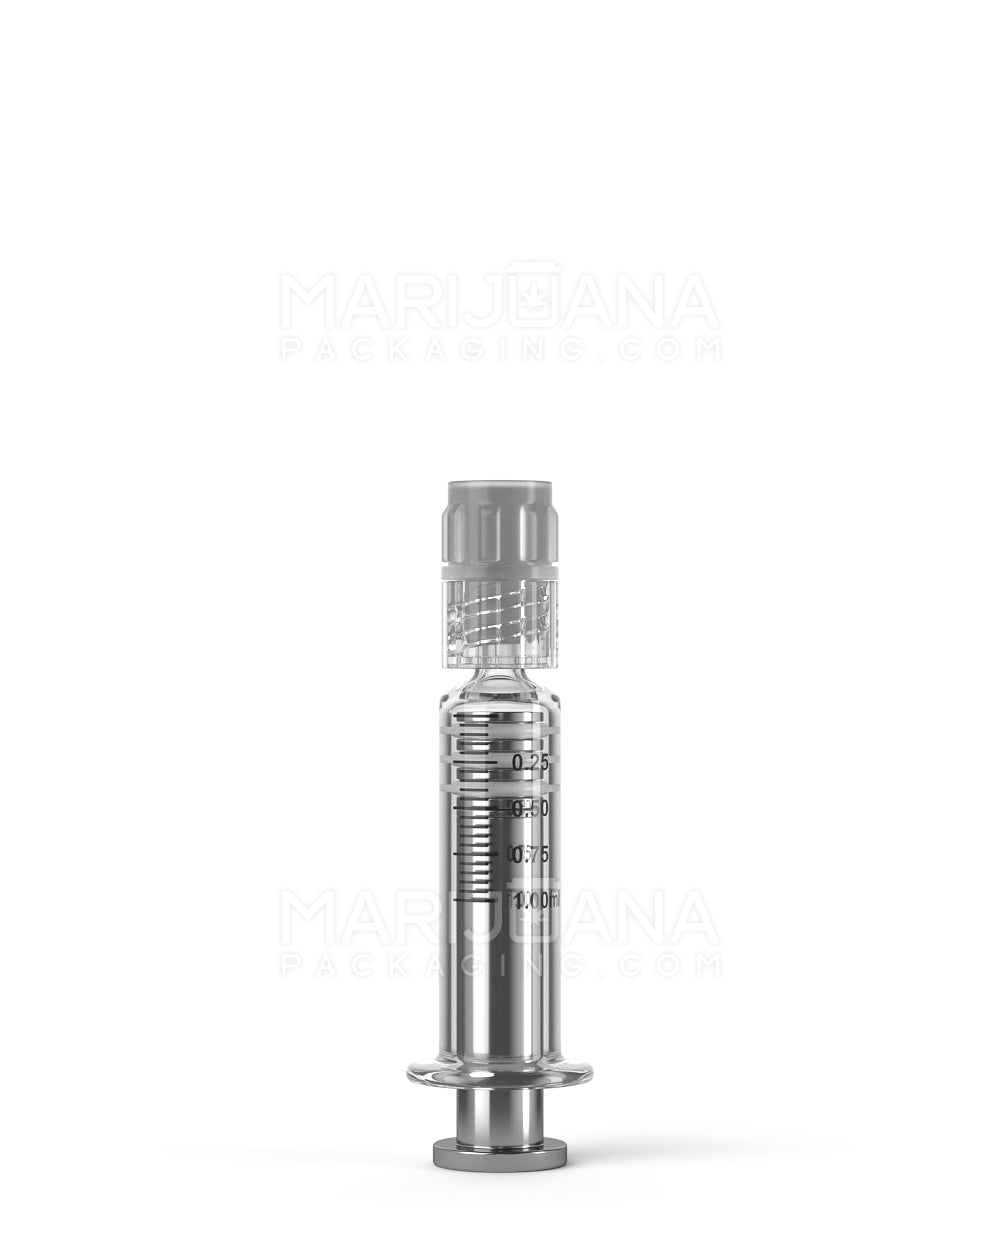 Luer Lock | Glass Dab Applicator Syringes w/ Metal Plunger | 1mL - 0.25mL Increments | Sample - 8